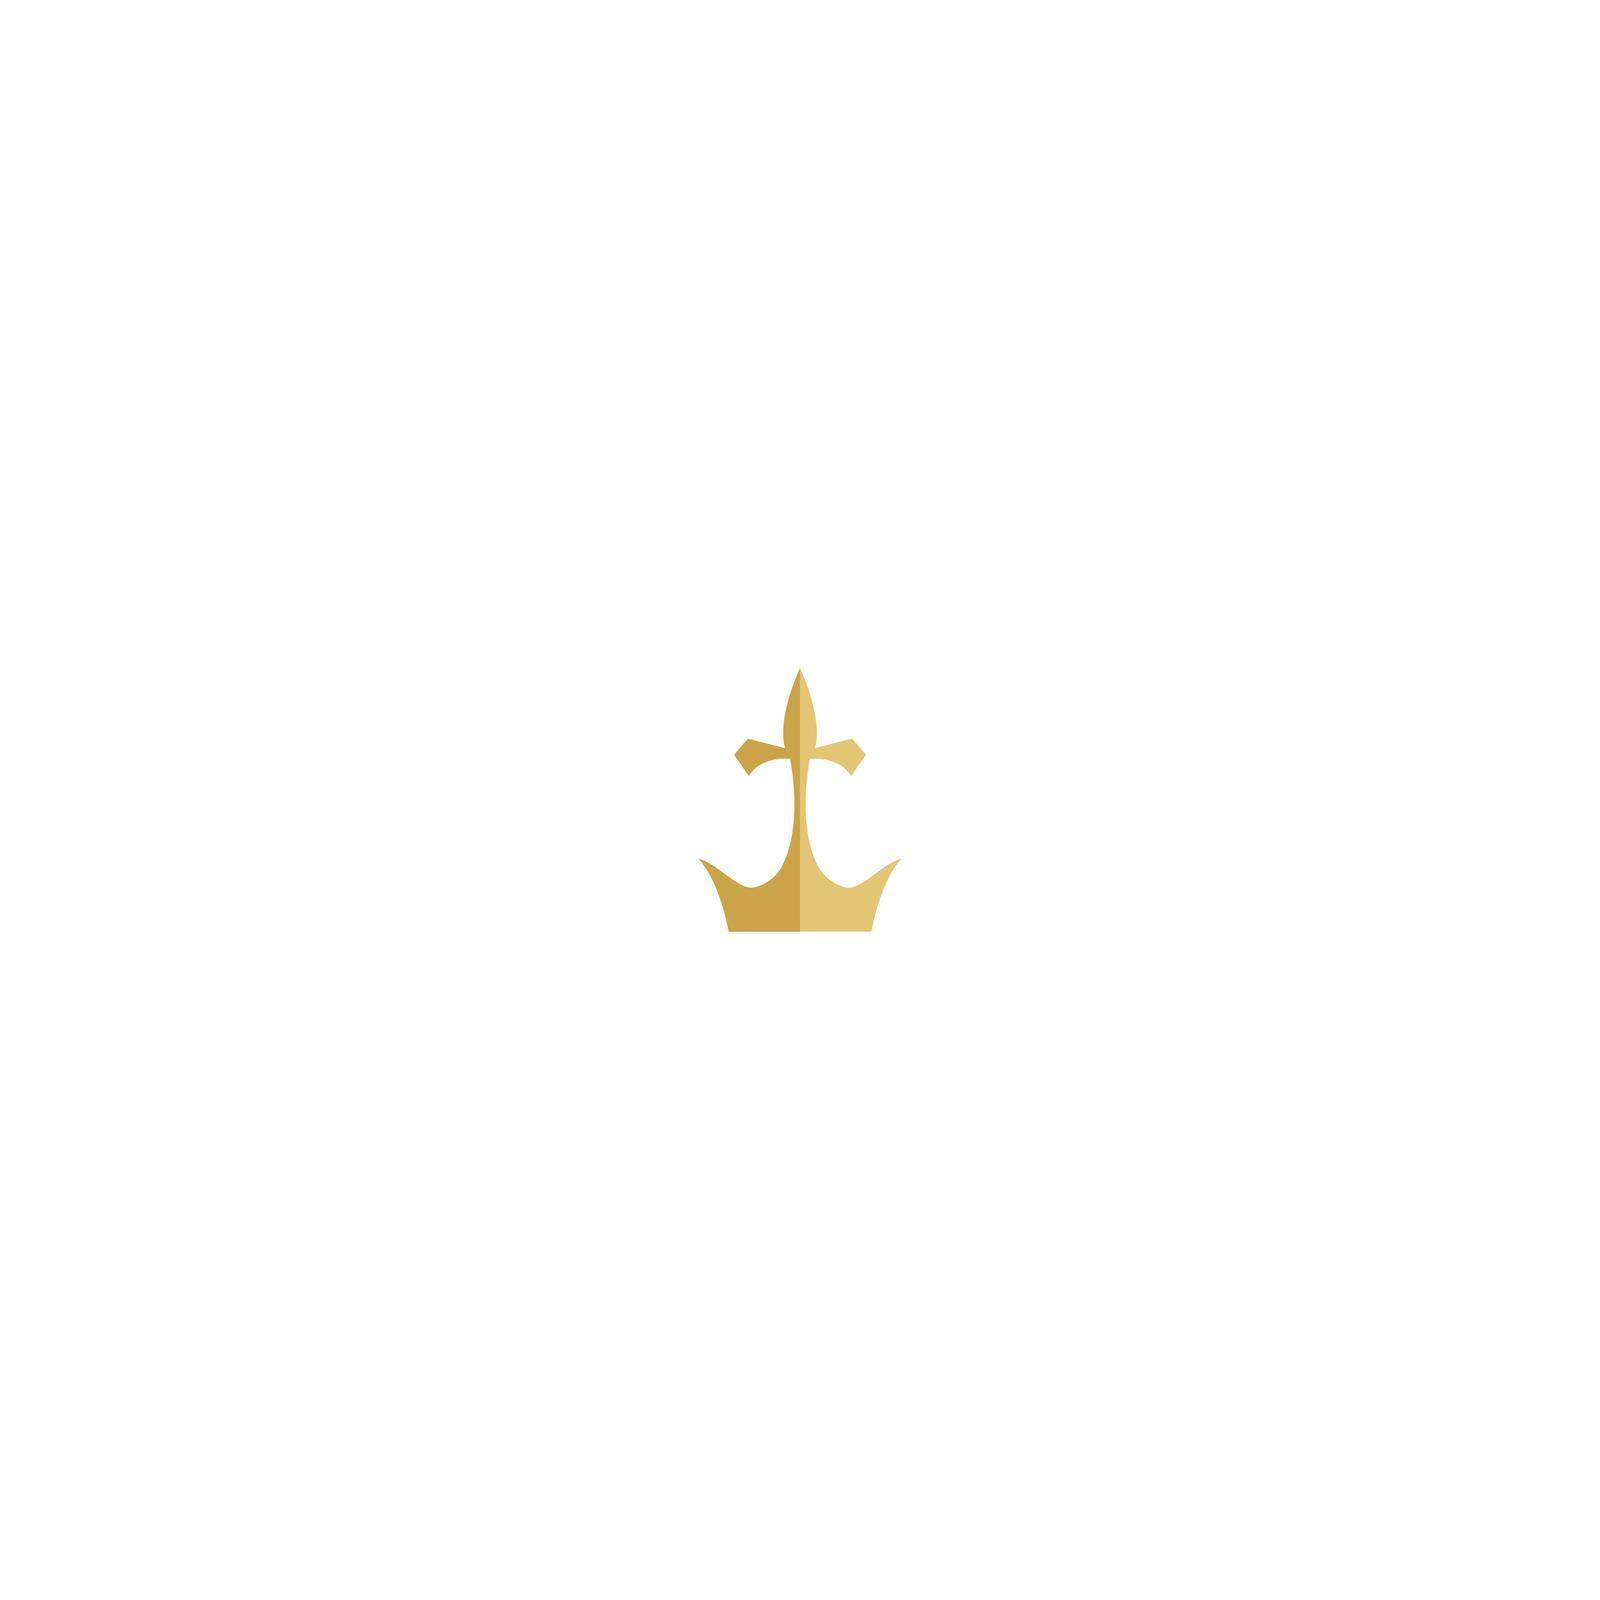 Crown Concept Logo icon Design by bellaxbudhong3